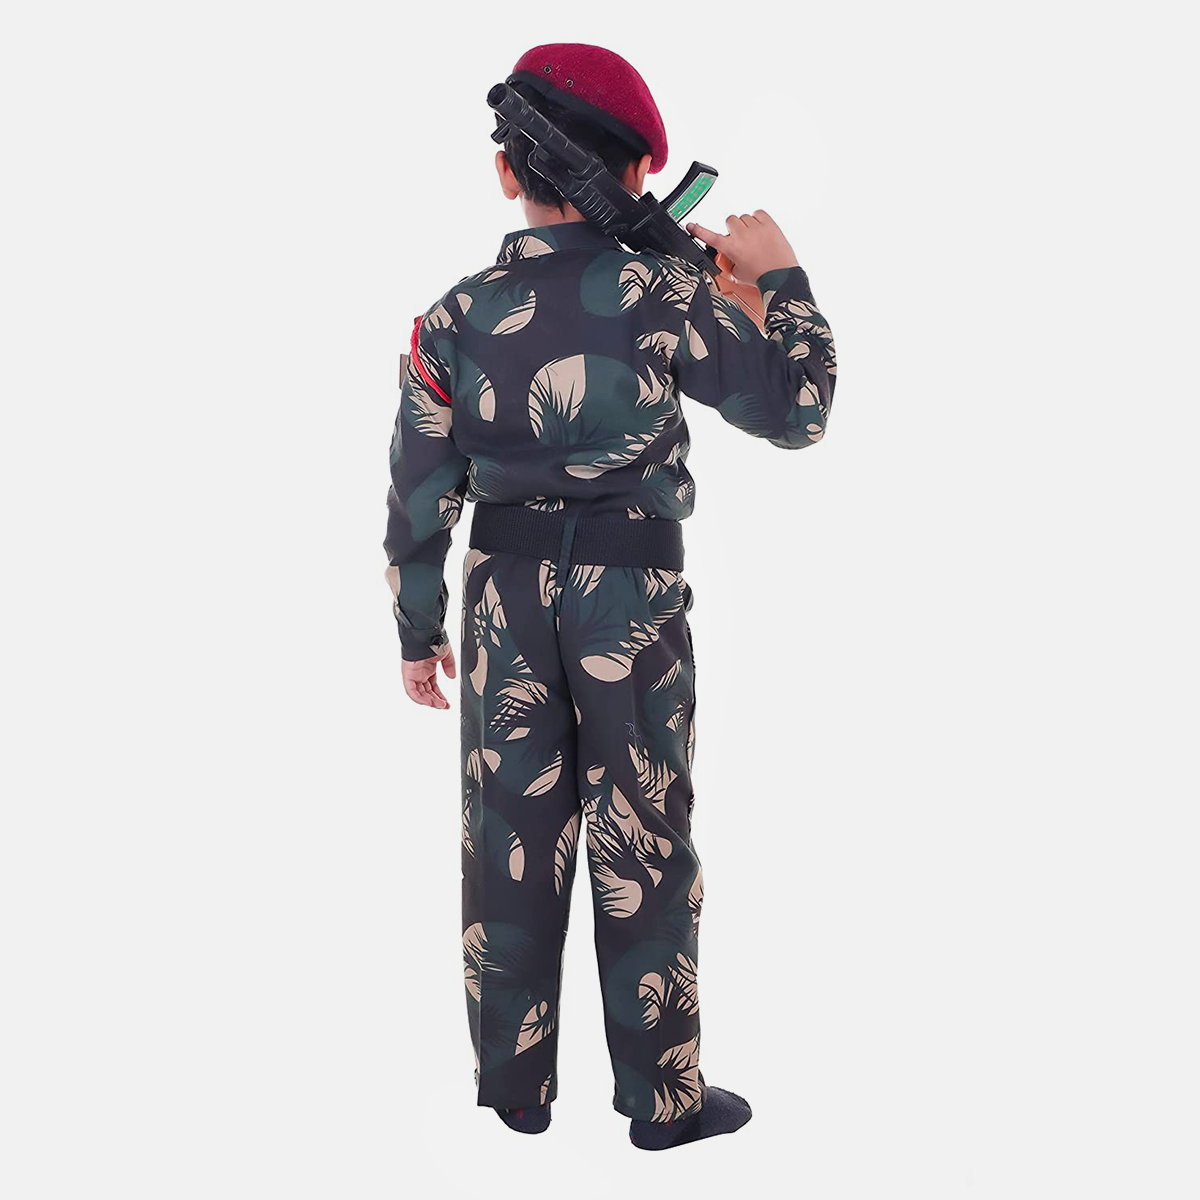 Army Dress for Kids, 14 Pcs Set with Professional Belt, Special Badges, Maroon Beret Cap